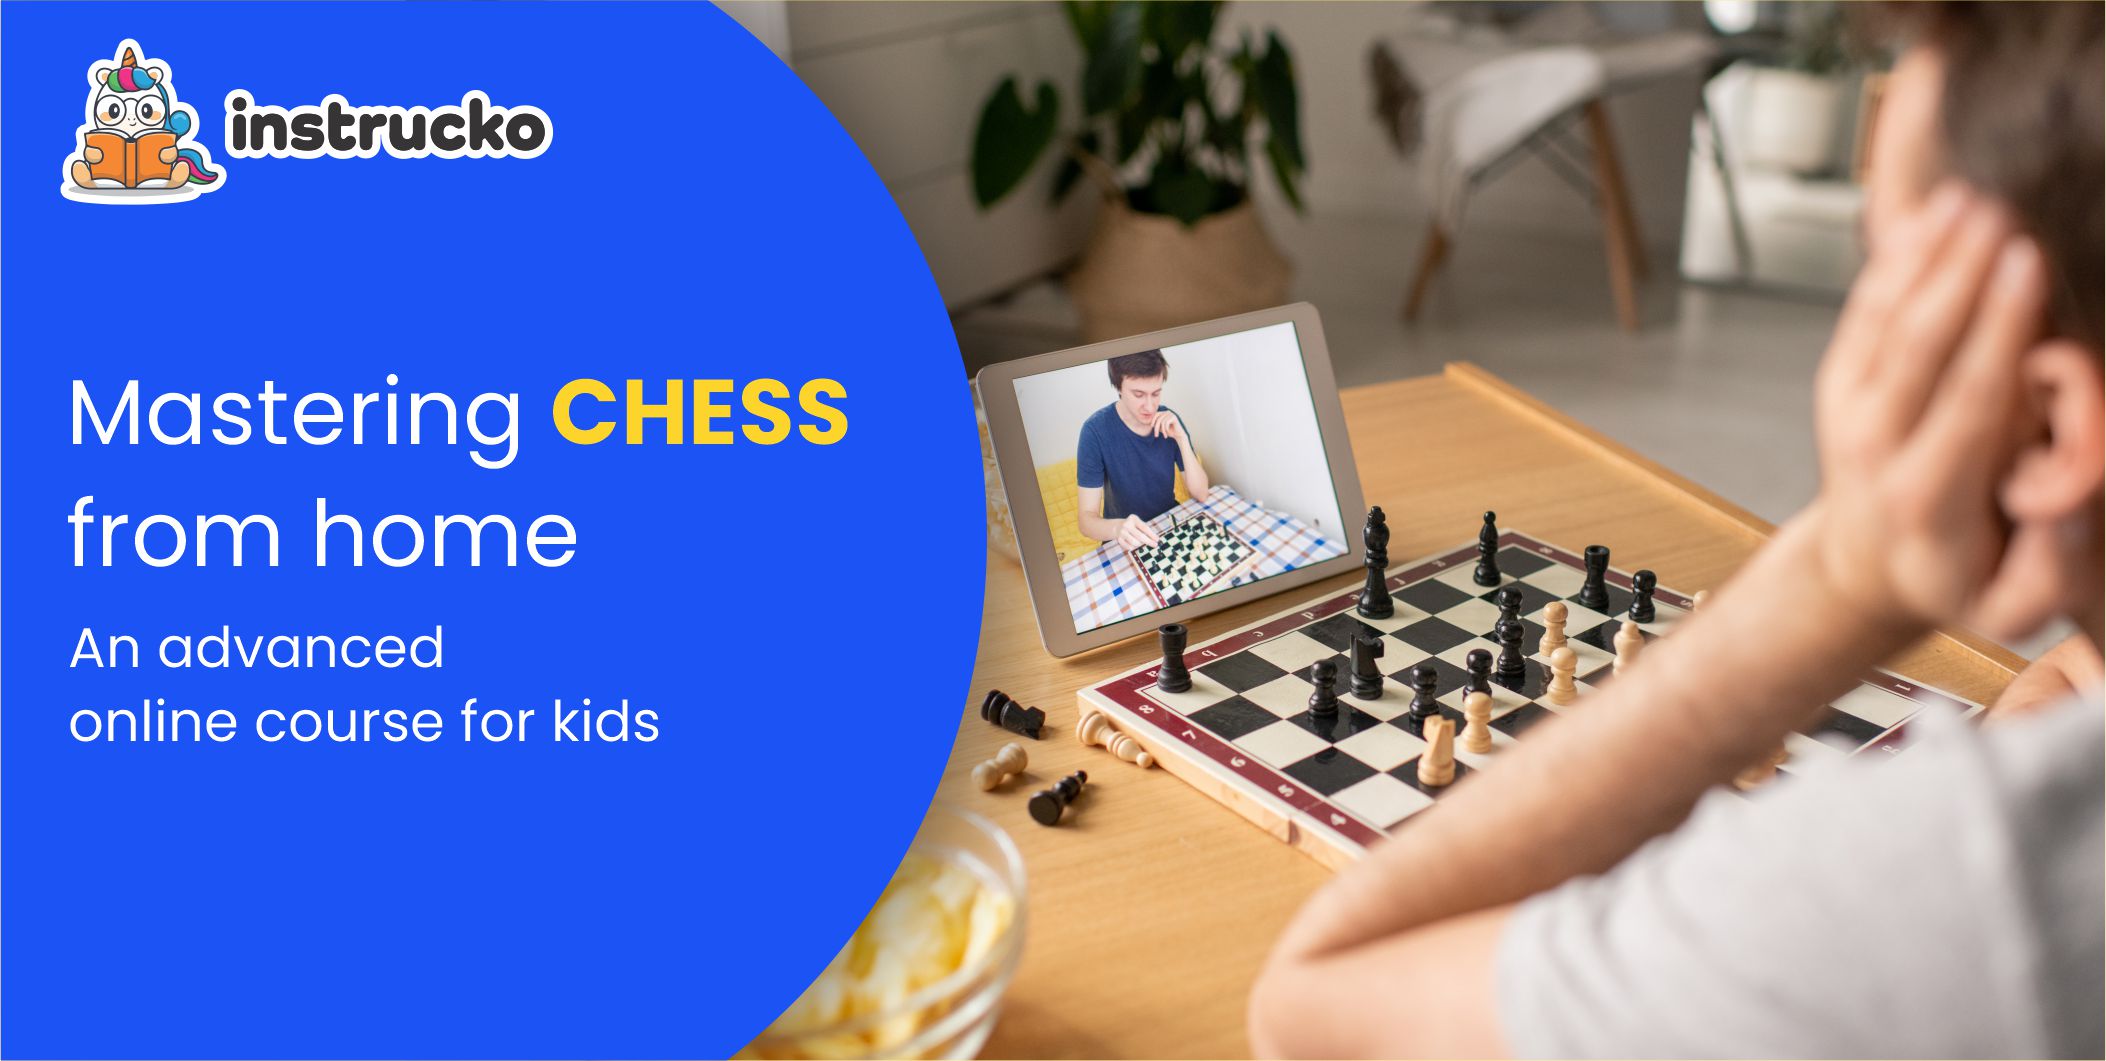 Master Chess - Online Chess School: Lessons for Beginners